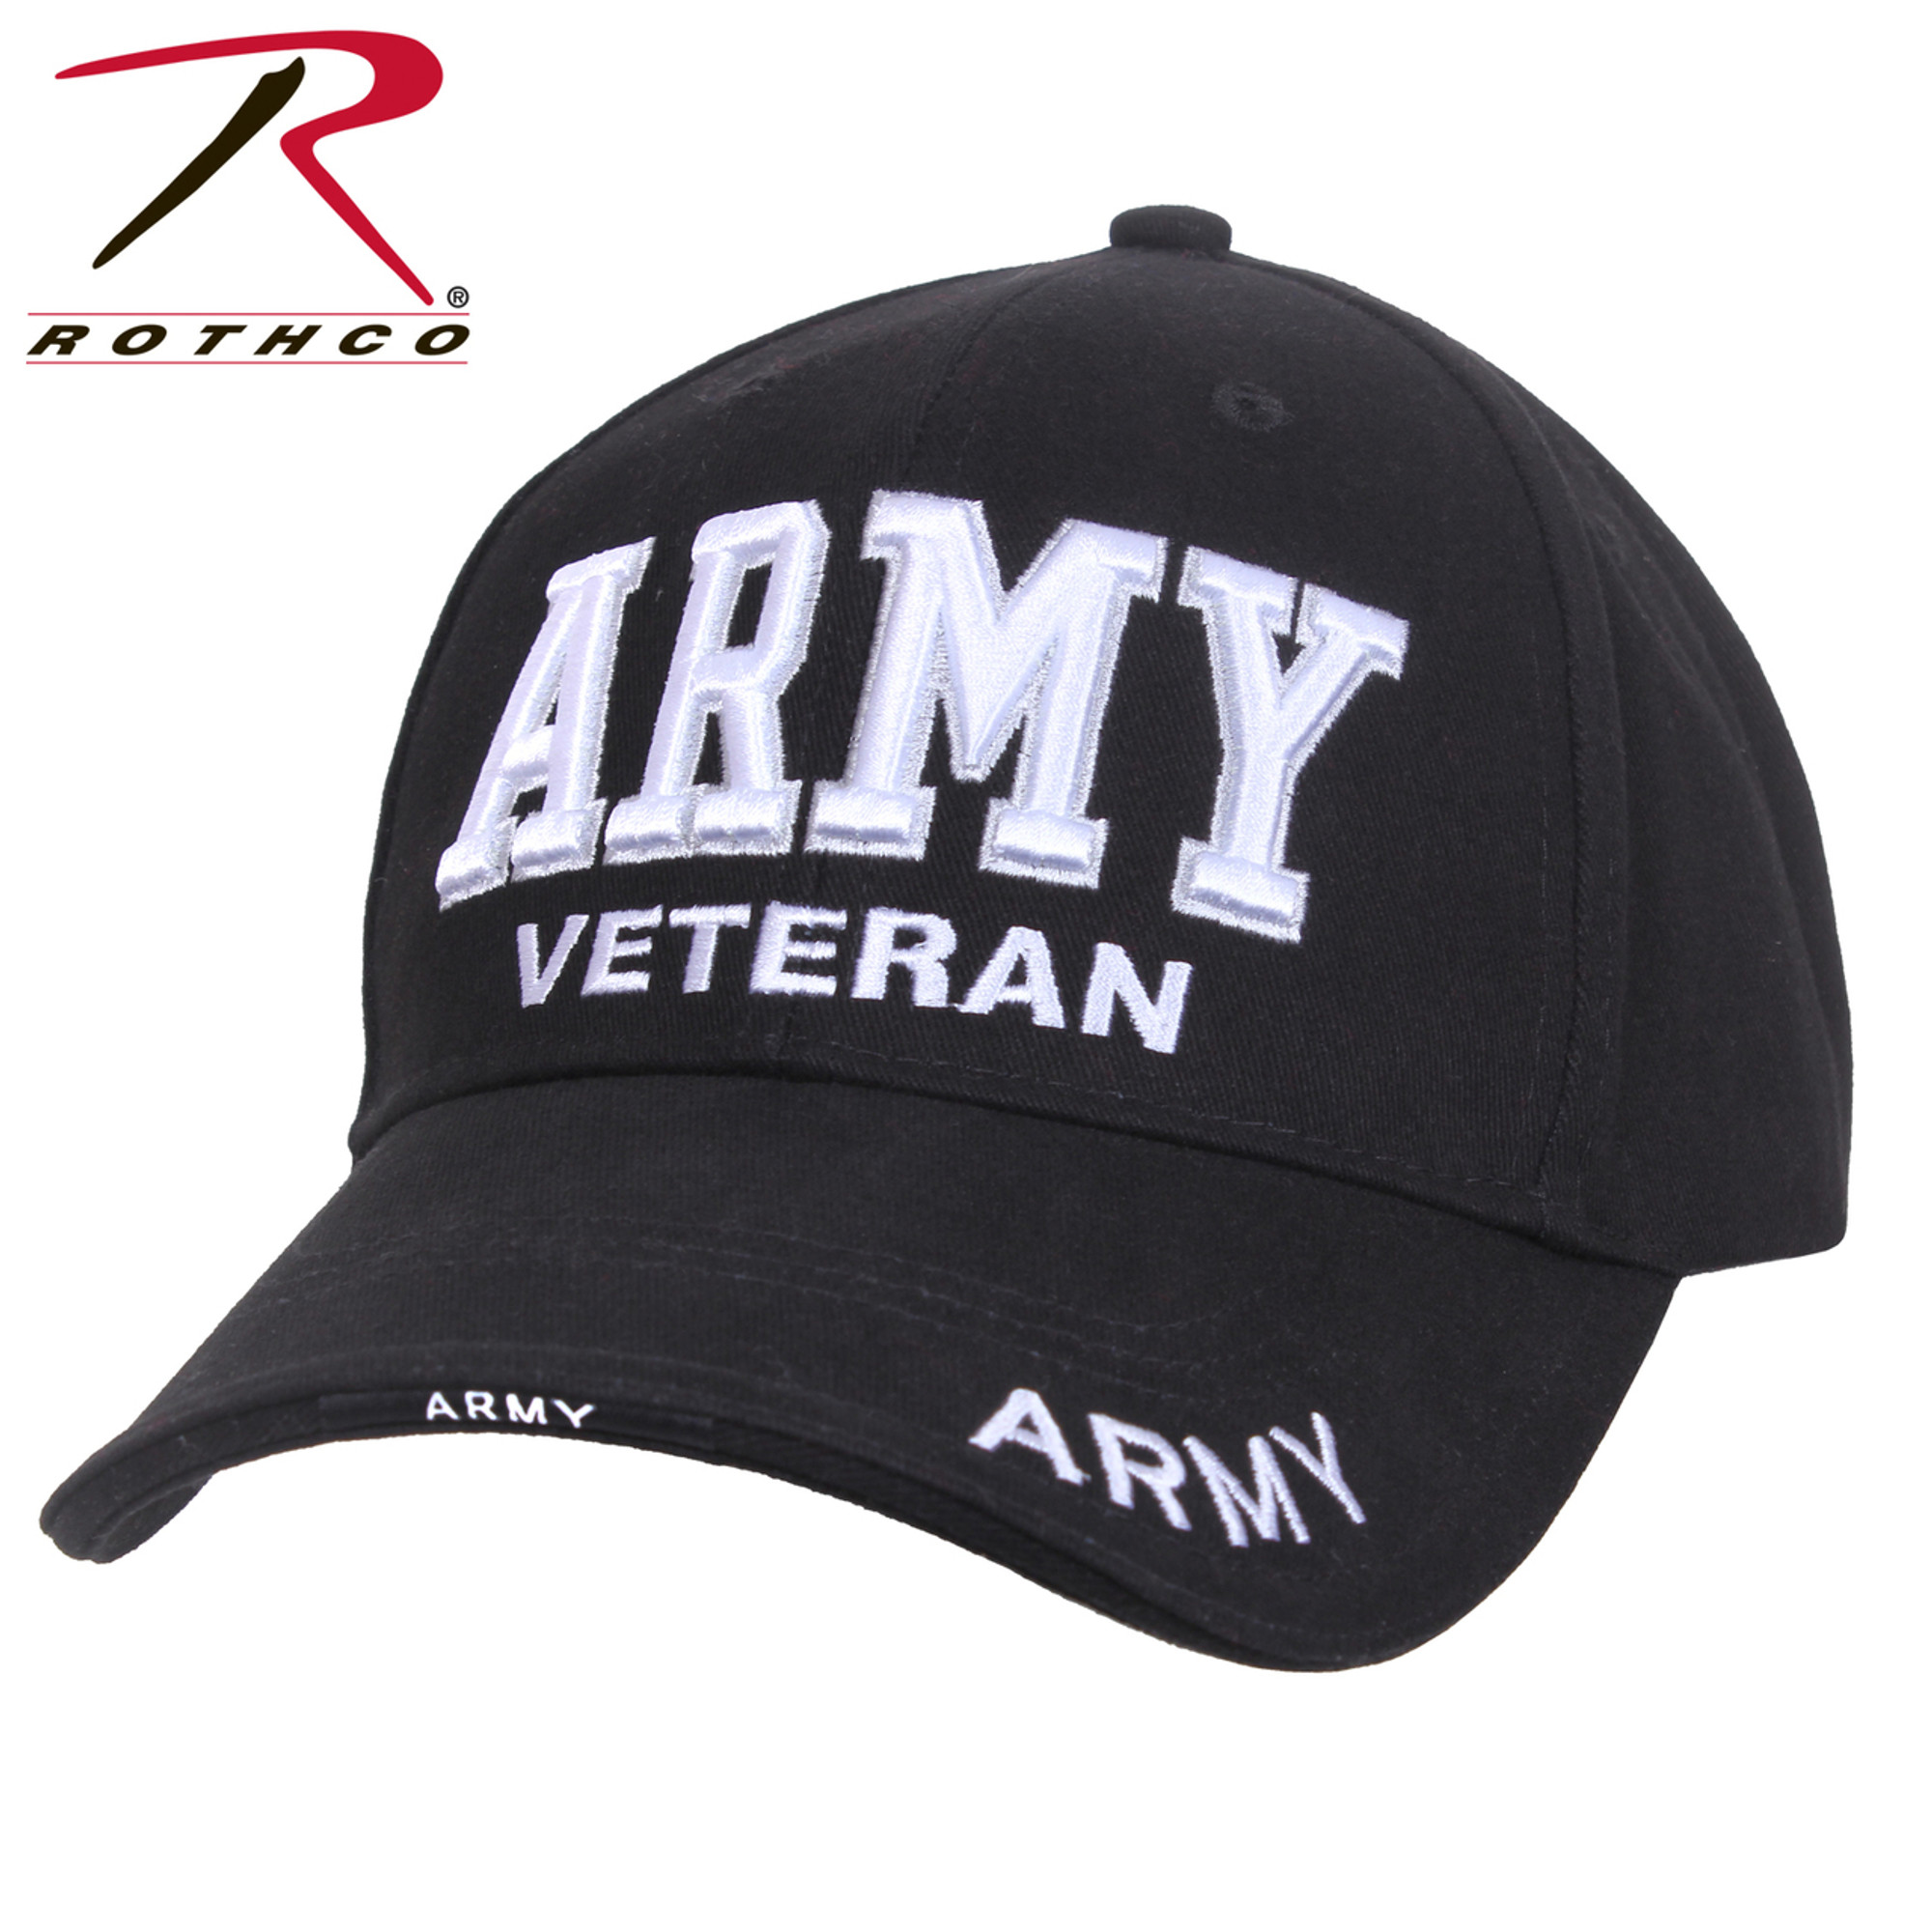 Rothco Deluxe Low Profile Cap - Army Veteran